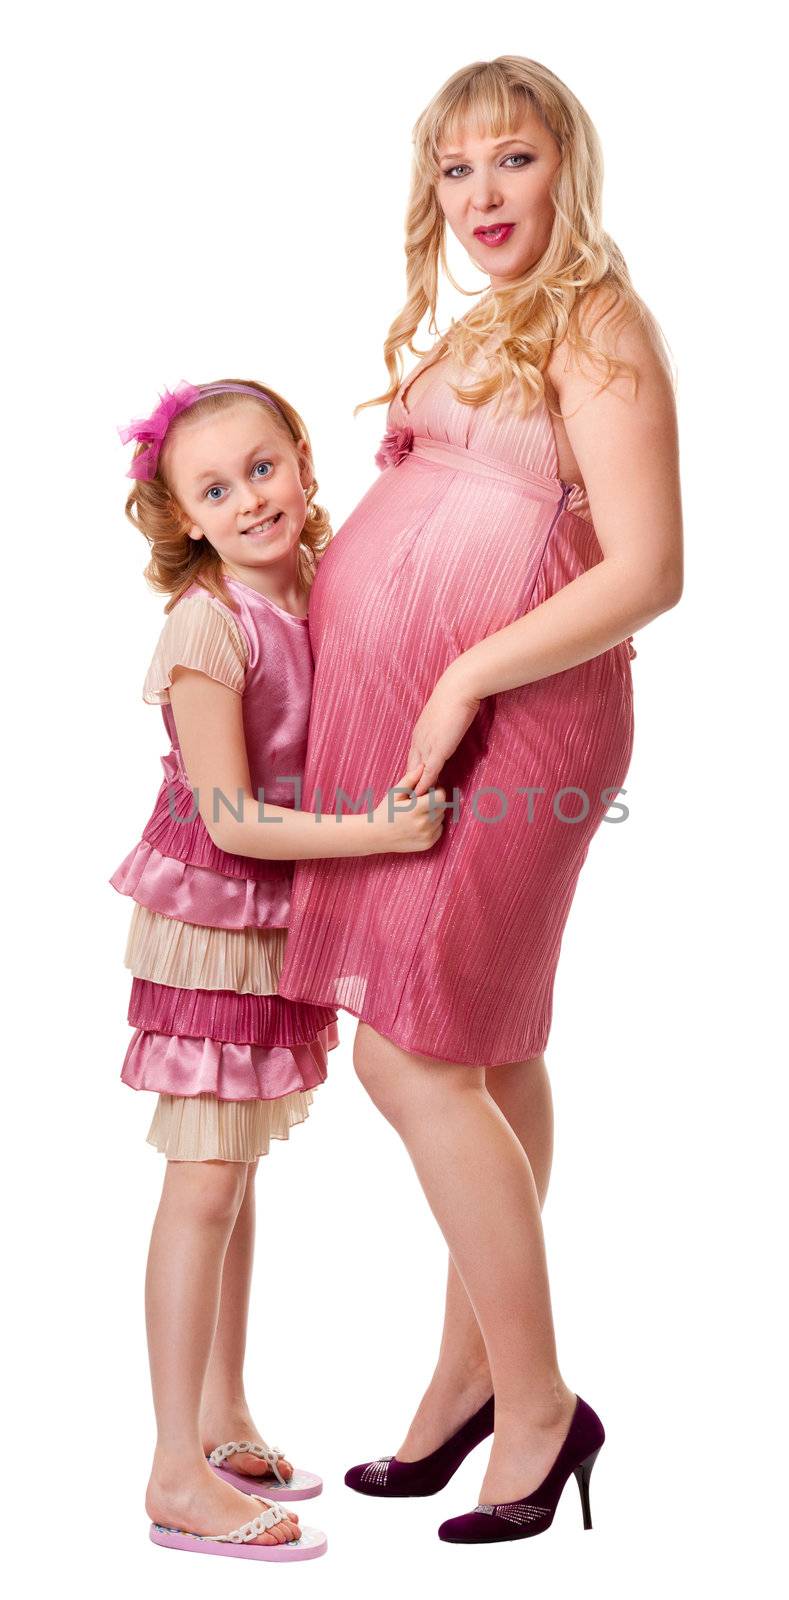 pregnant woman and her daughter - schoolgirl on a white background